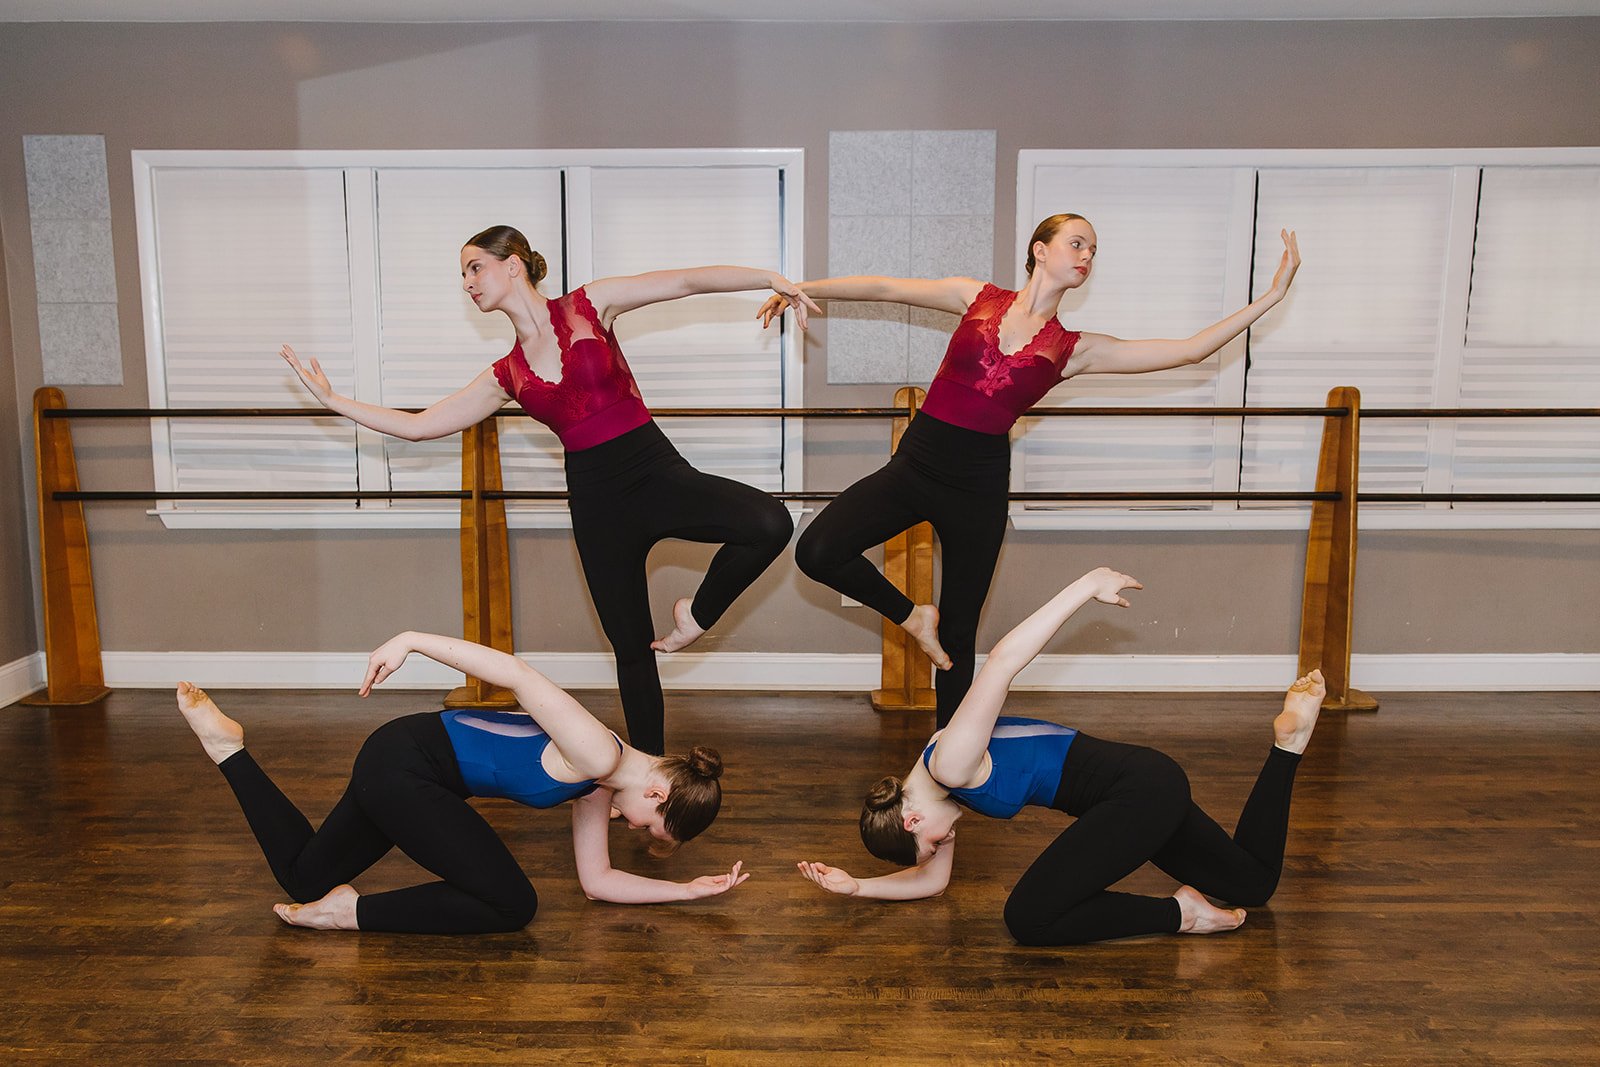  Dancers work with guest choregraphers to craft works that are presented in concerts throughout the year. 